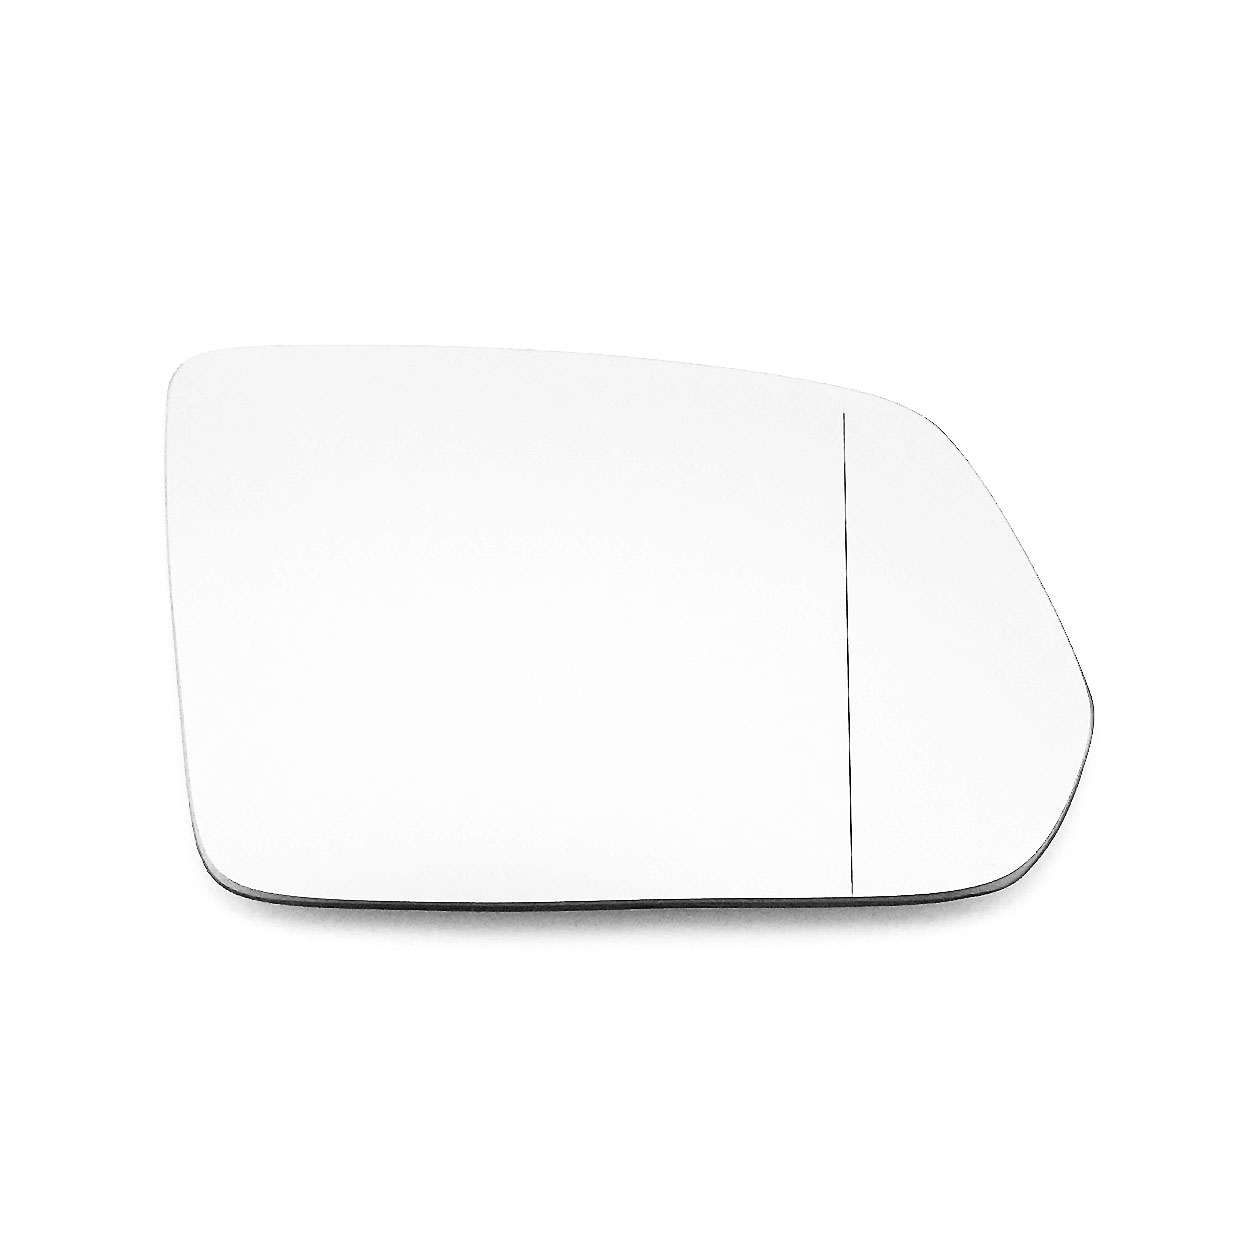 Mercedes ML Wing Mirror Glass RIGHT HAND ( UK Driver Side ) 2005 to 2012 – Wide Angle Wing Mirror ( W164 )